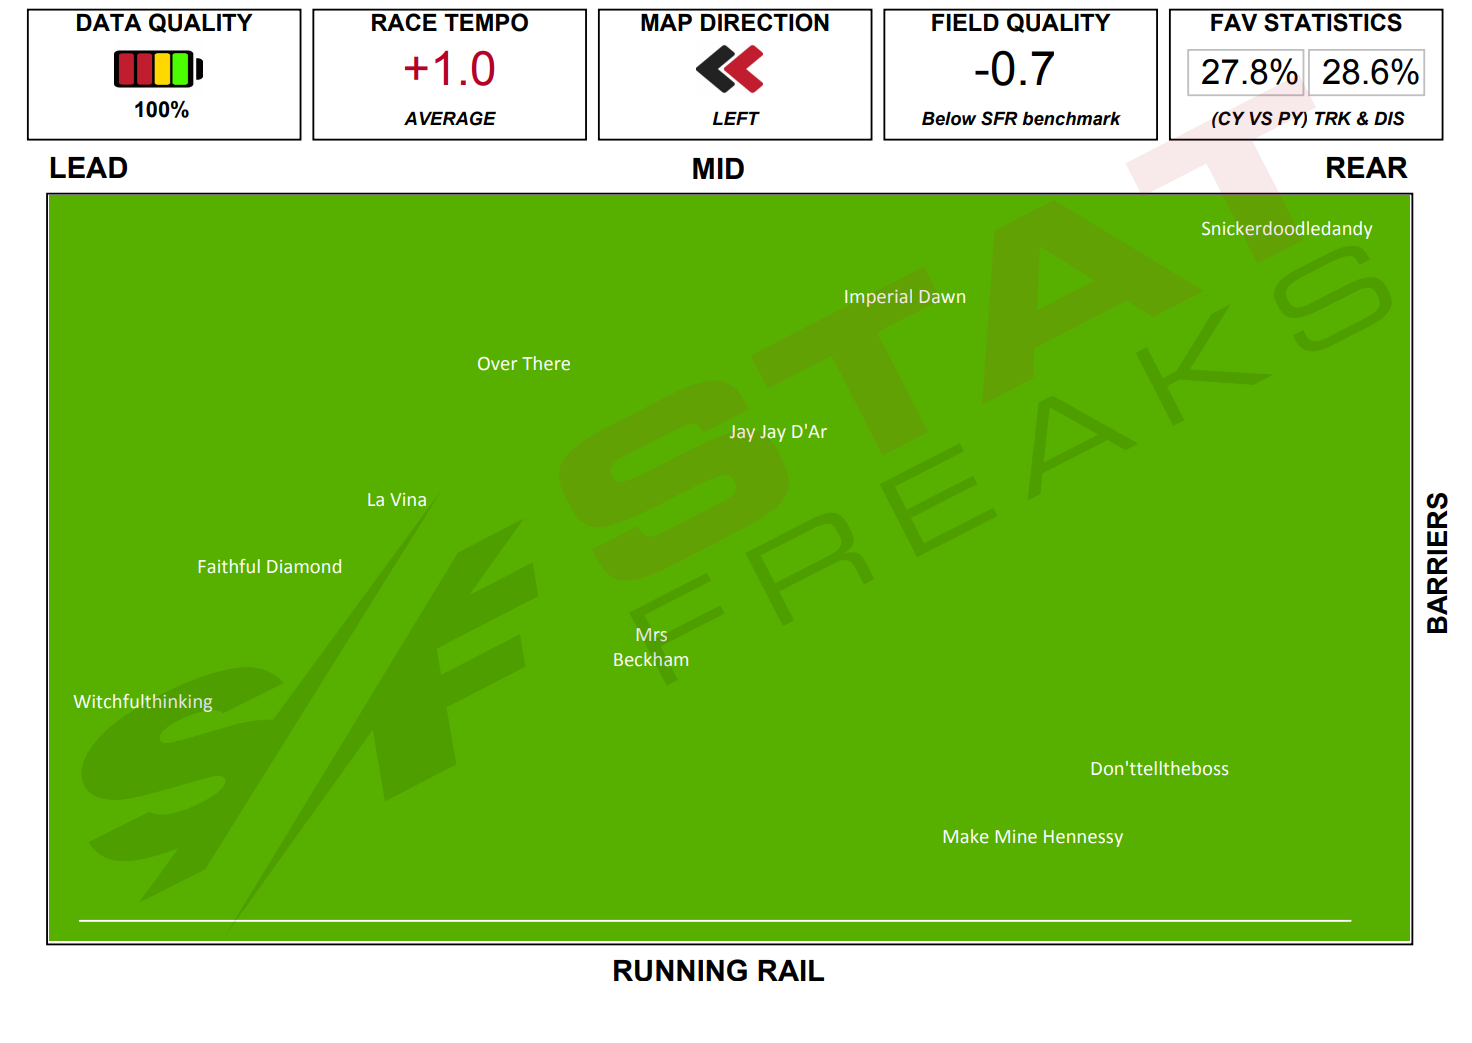 Click here to enlarge Flemington 2 Speed Map 6th of June Statfreaks.com.au